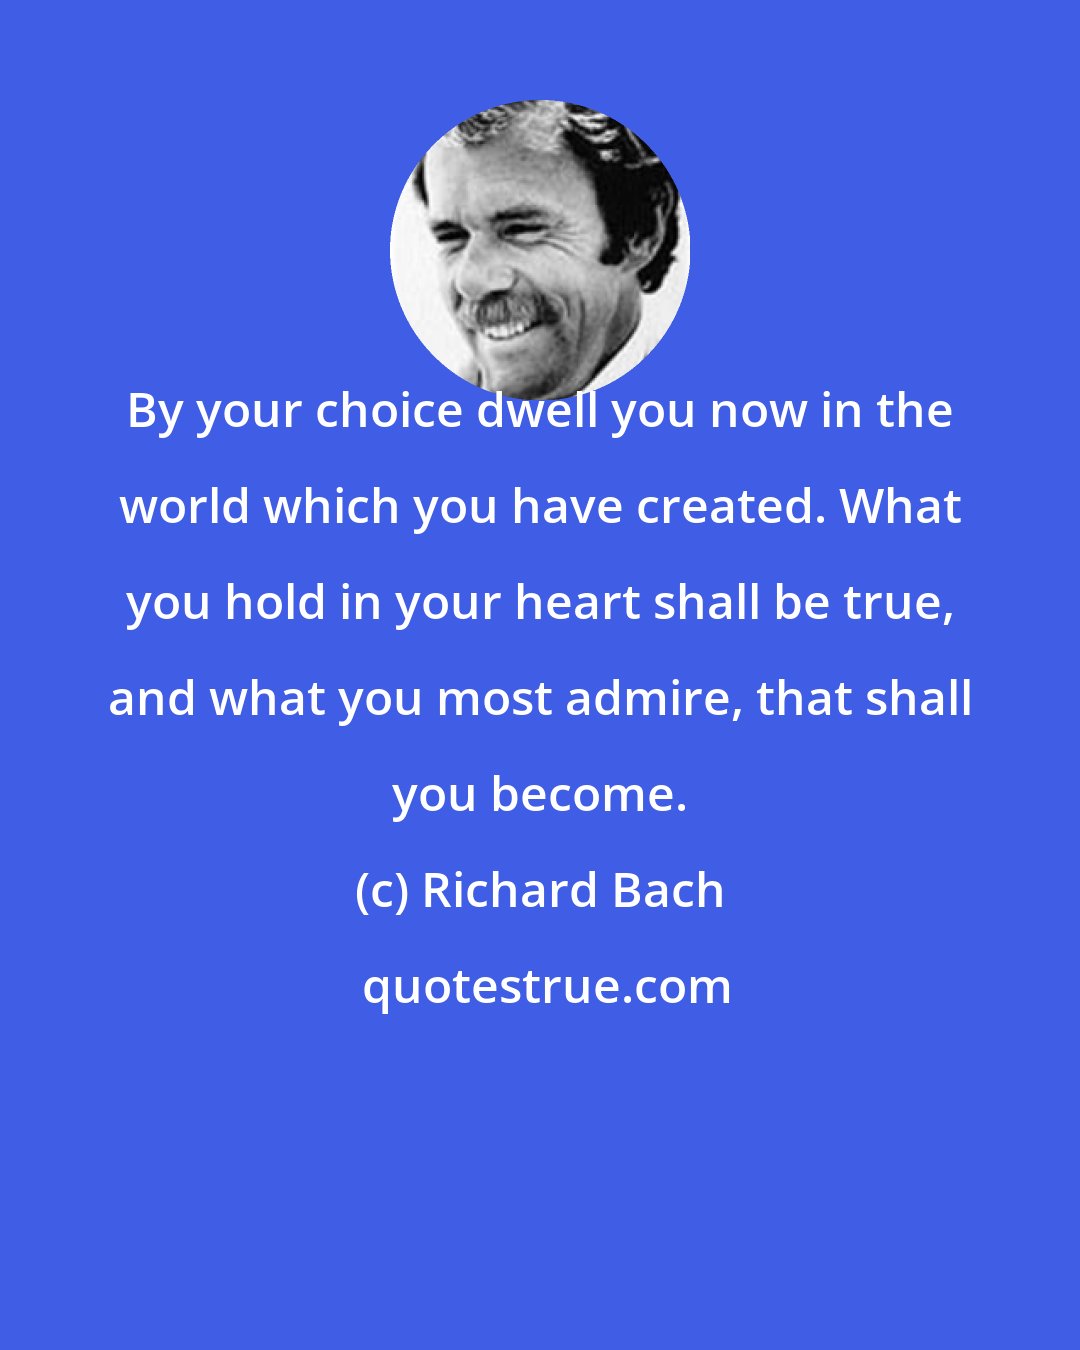 Richard Bach: By your choice dwell you now in the world which you have created. What you hold in your heart shall be true, and what you most admire, that shall you become.